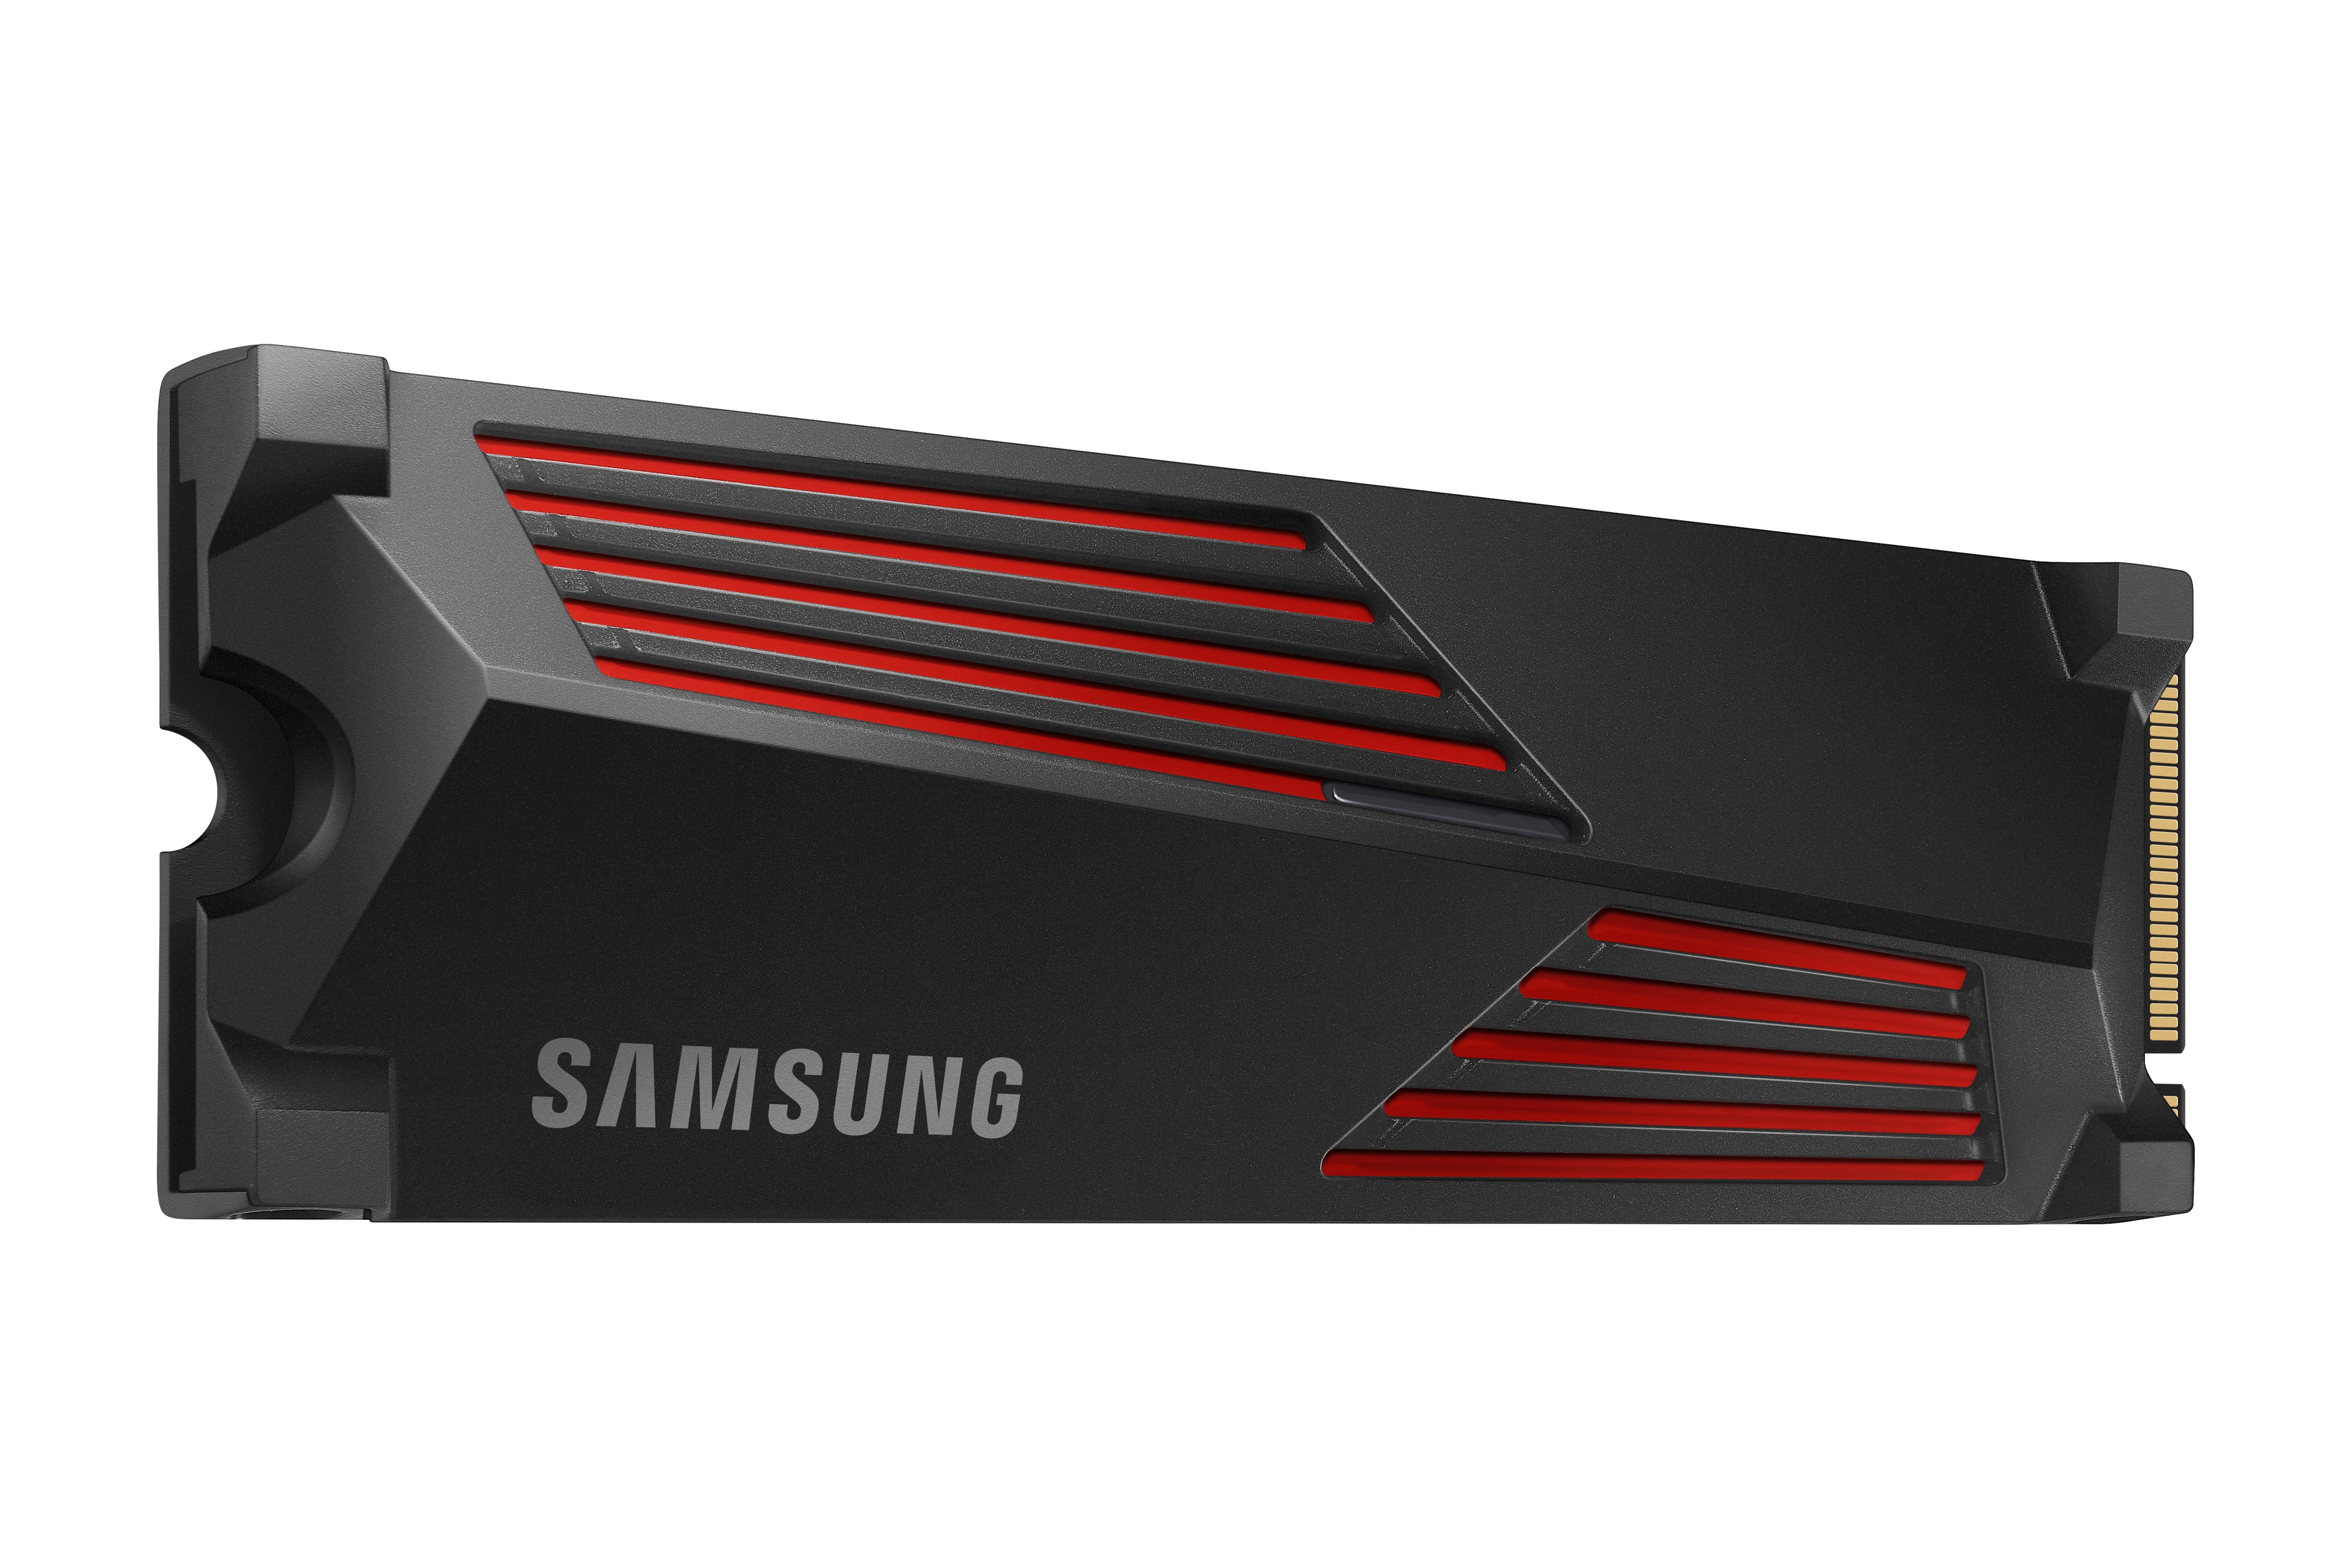 A render of the Samsung 990 Pro SSD with its heatsink accessory attached.